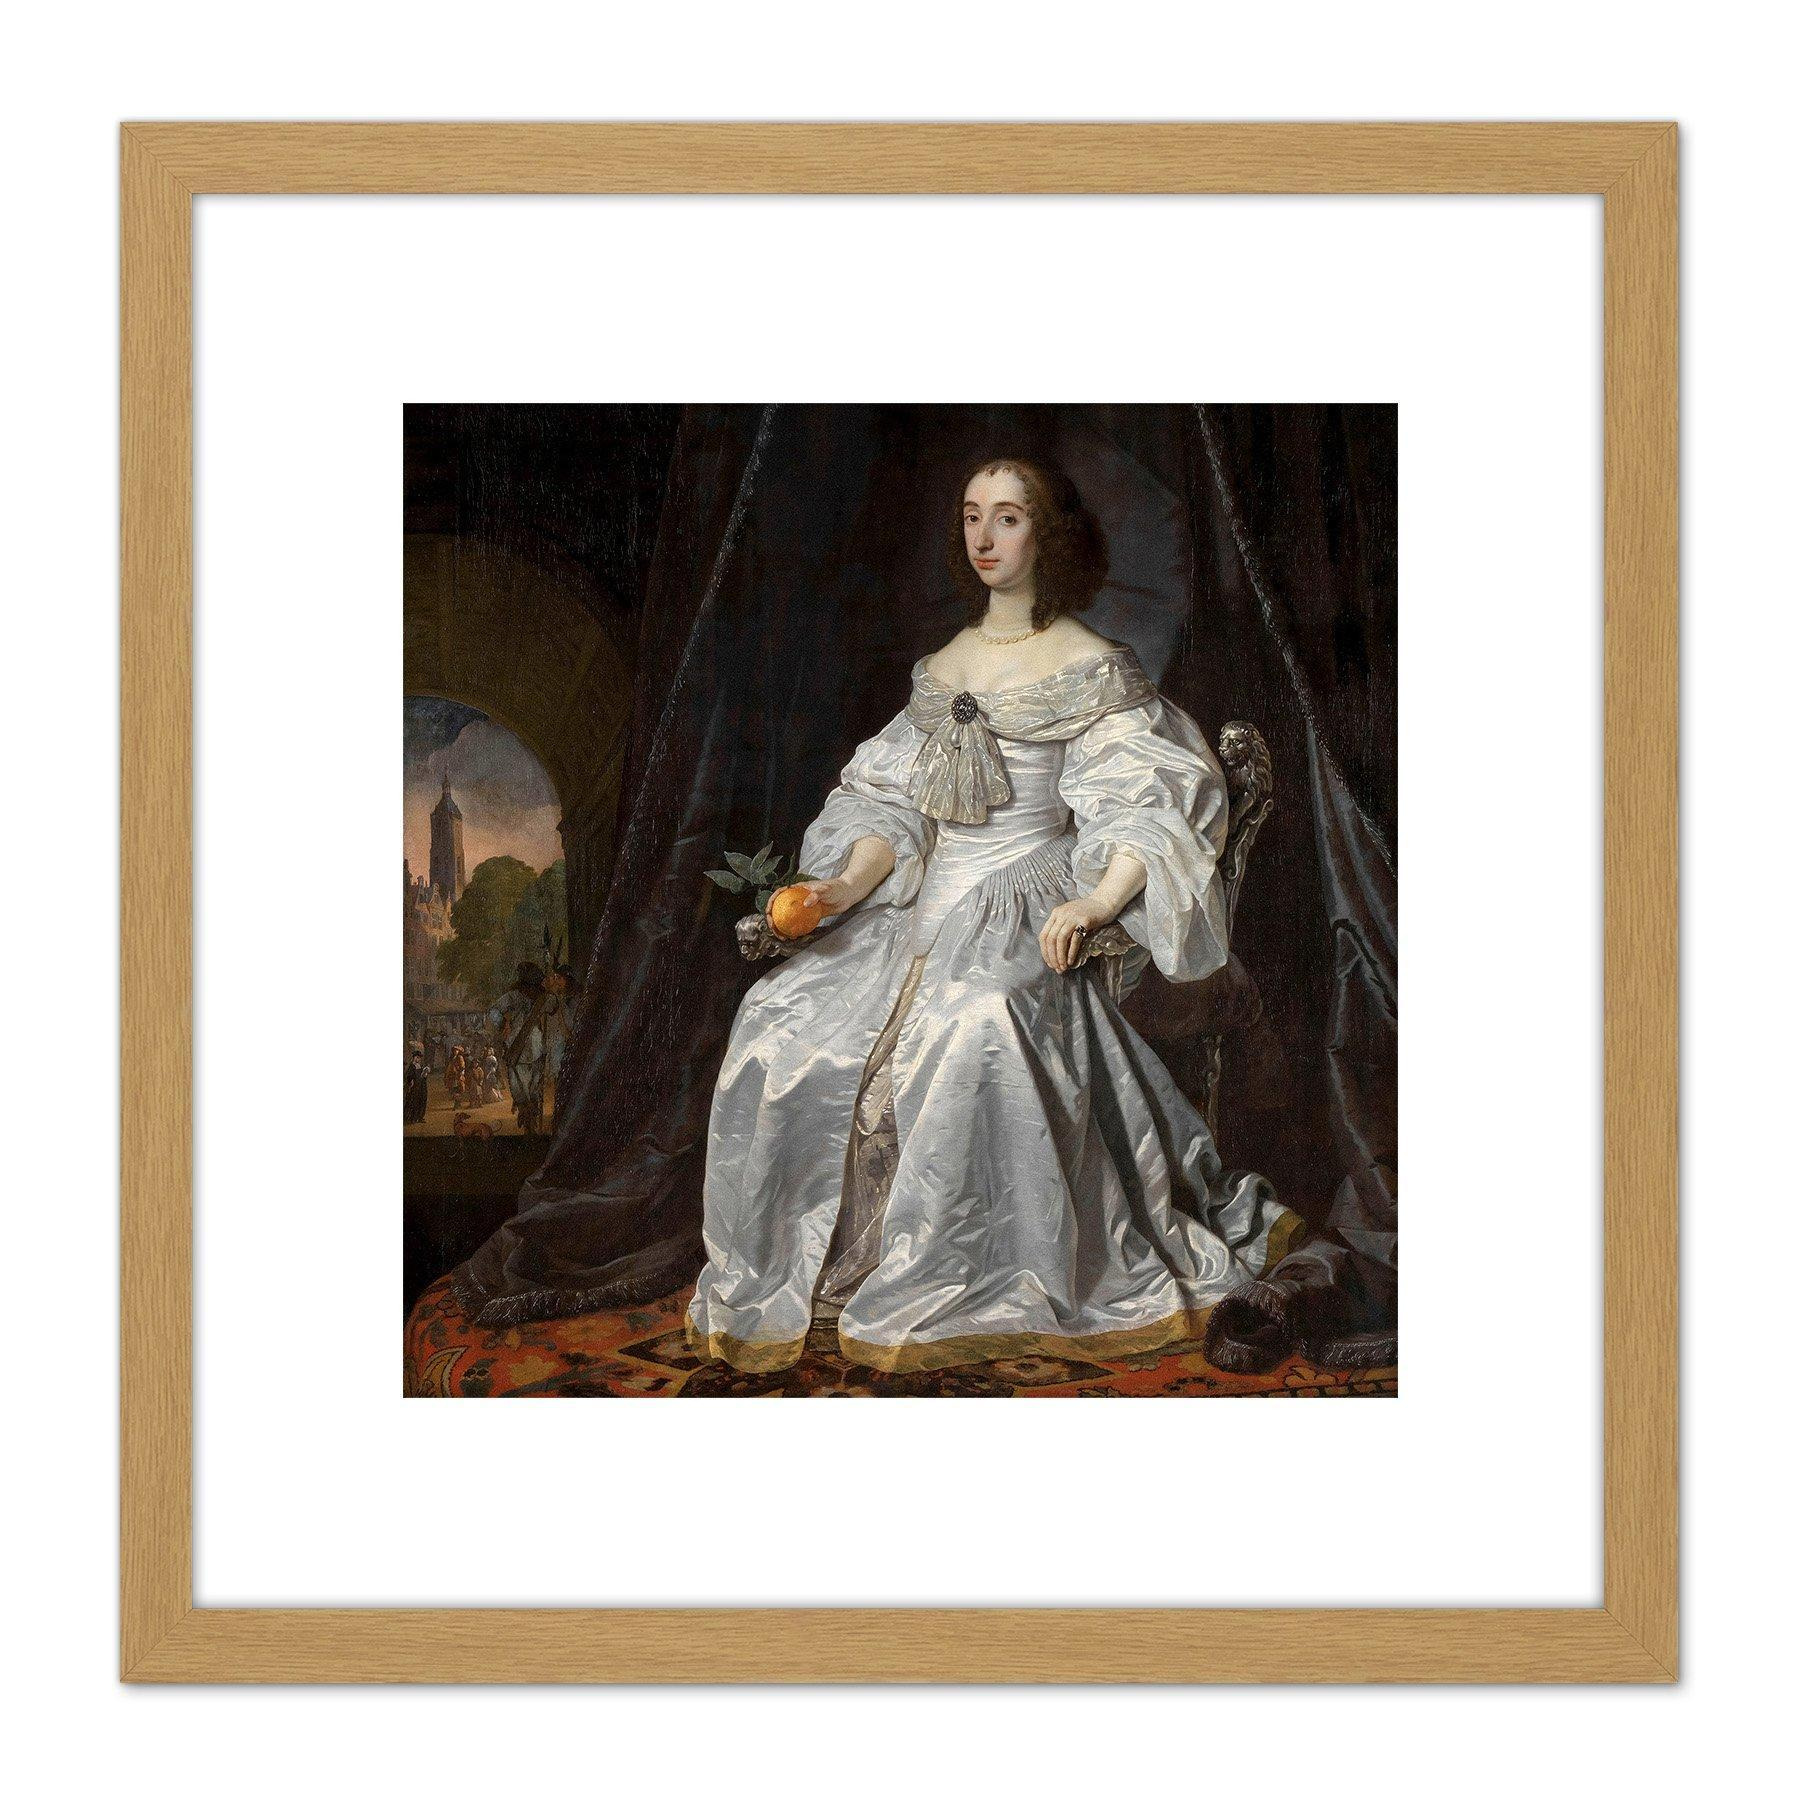 Helst Mary Stuart Princess Orange Widow William Ii 8X8 Inch Square Wooden Framed Wall Art Print Picture with Mount - image 1